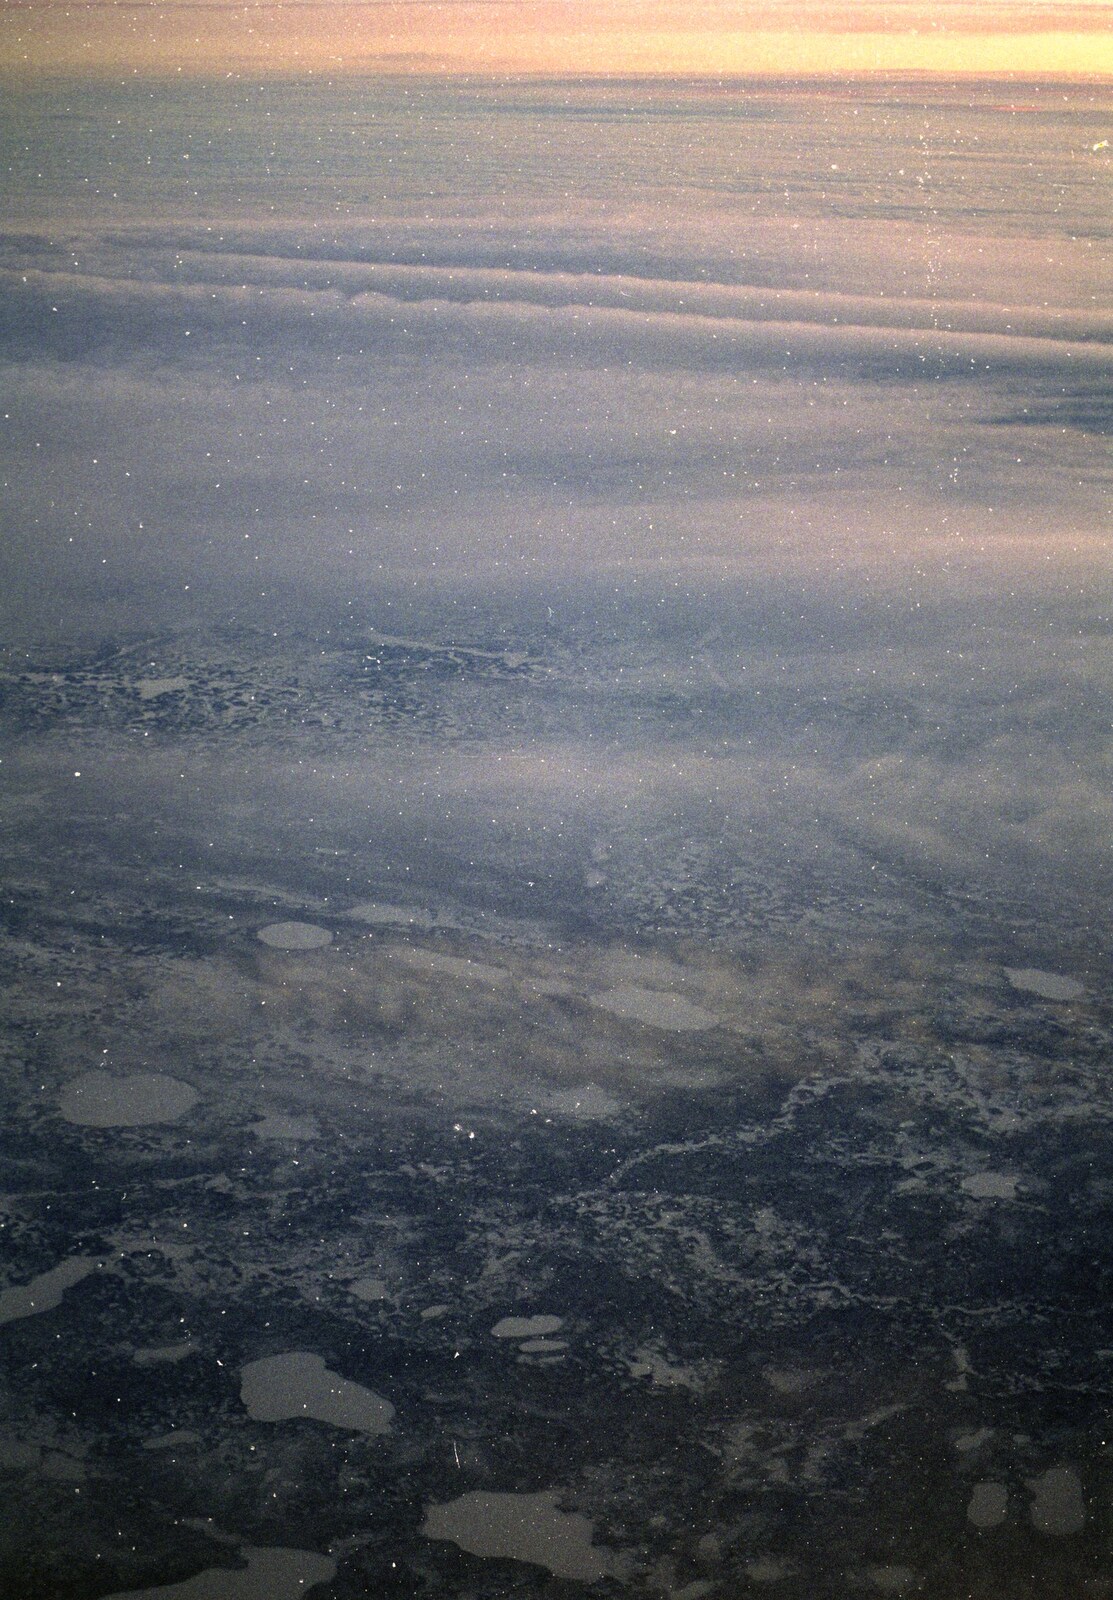 The ice floes of Canada as seen from the flightdeck at 35,000 feet from A 747 Cockpit, Honolulu and Pearl Harbor, O'ahu, Hawai'i, United States - 20th November 1992